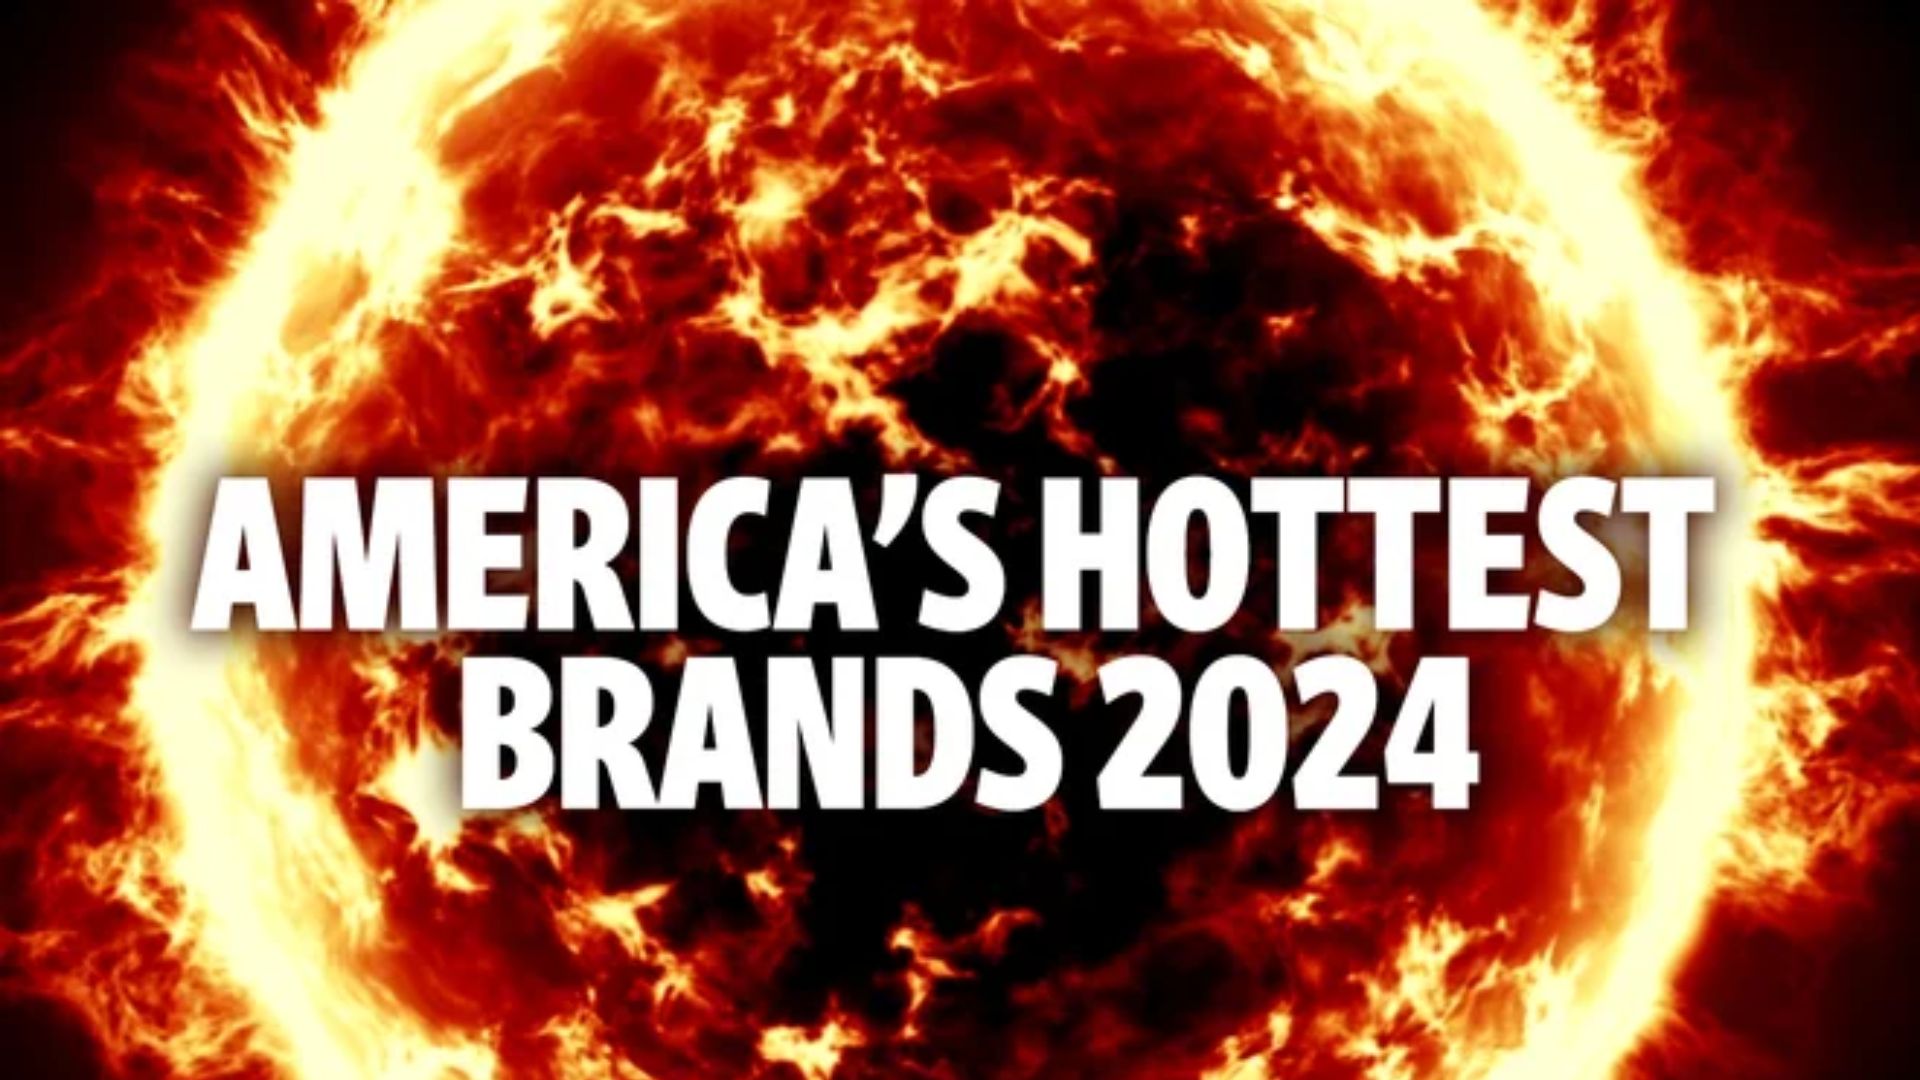 Introducing america’s hottest brands 2024—everything you need to know